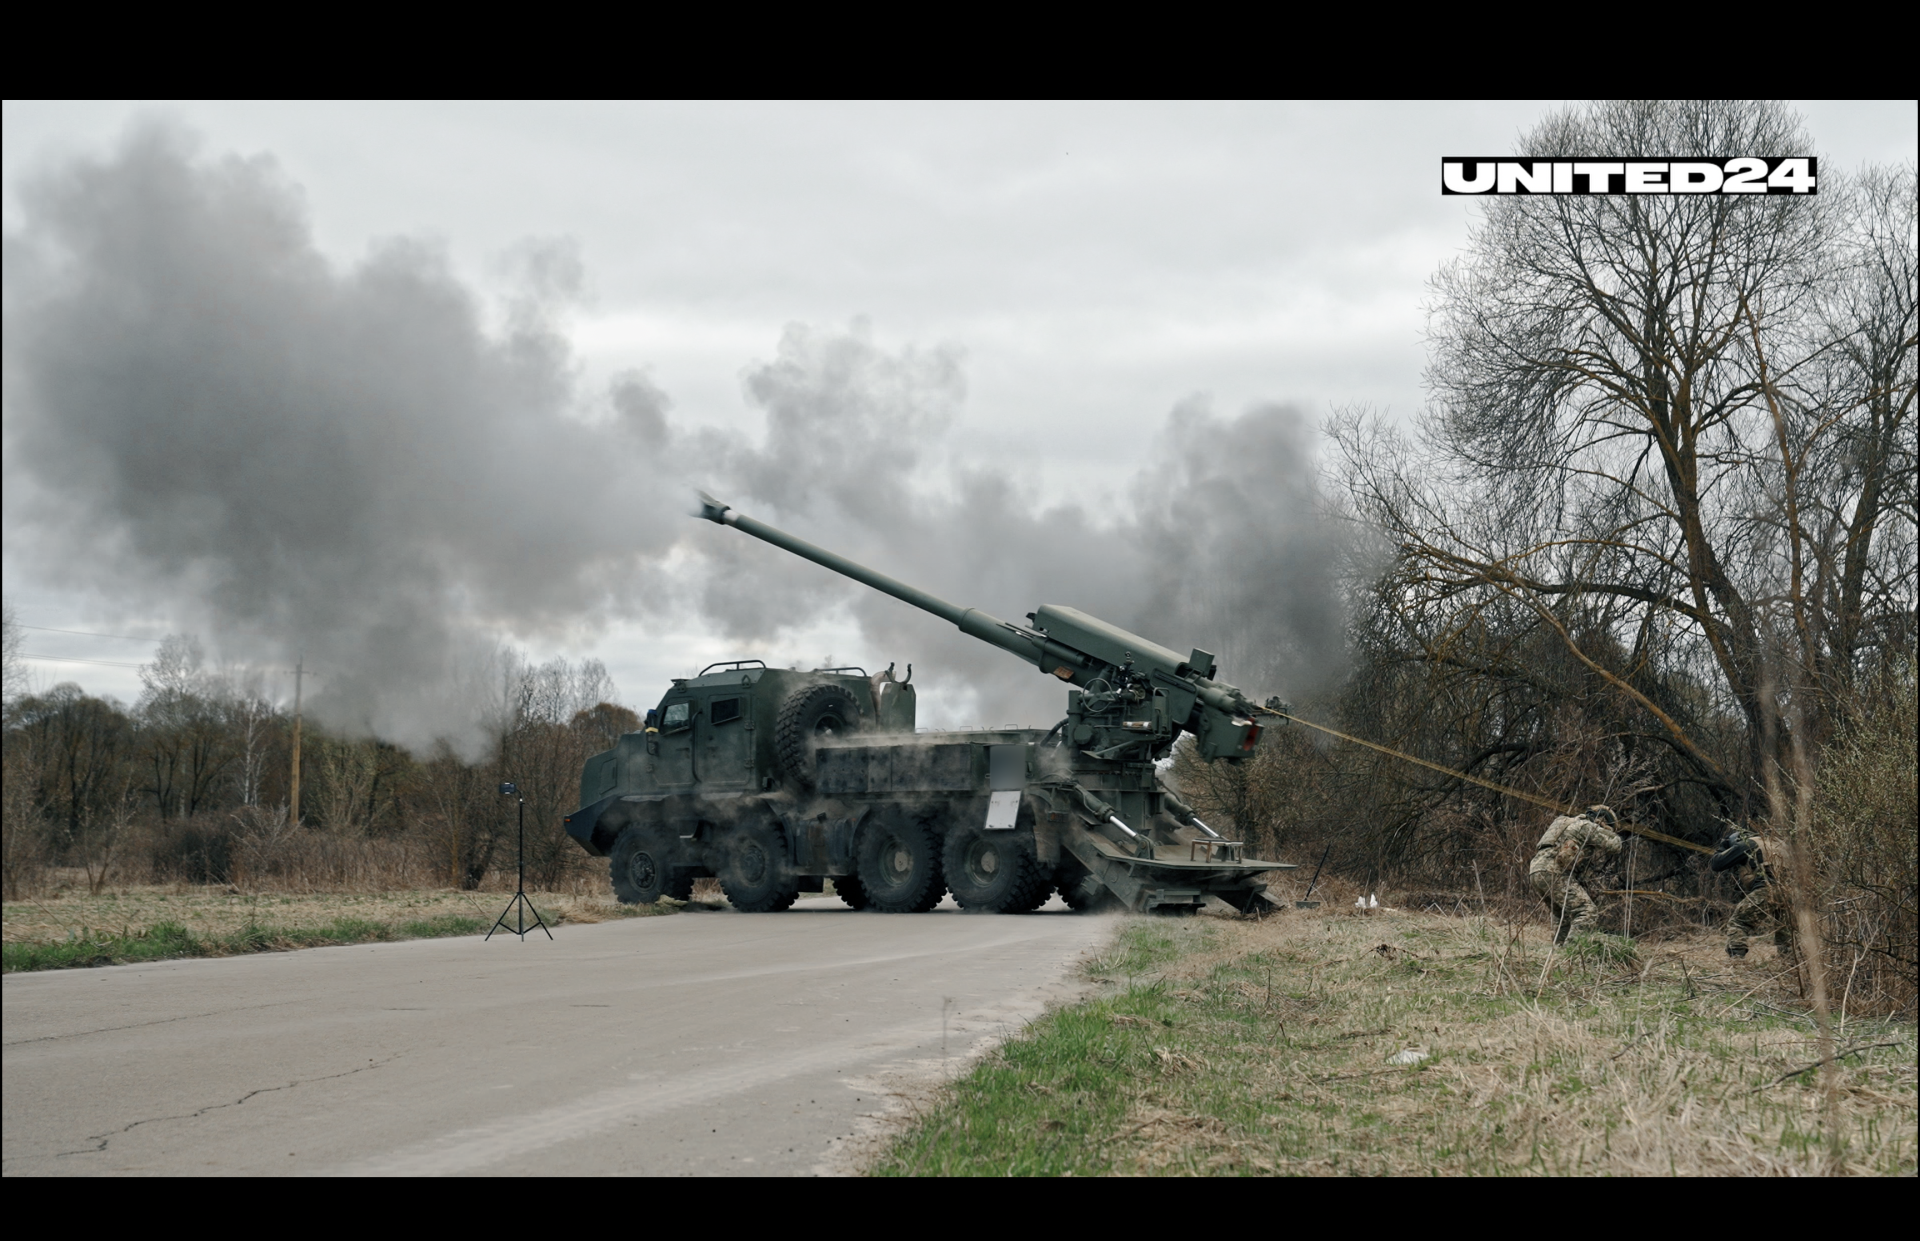 Ukraine Produces 10 Bohdana Self-Propelled Artillery Units Monthly. Here’s What We Know About Them